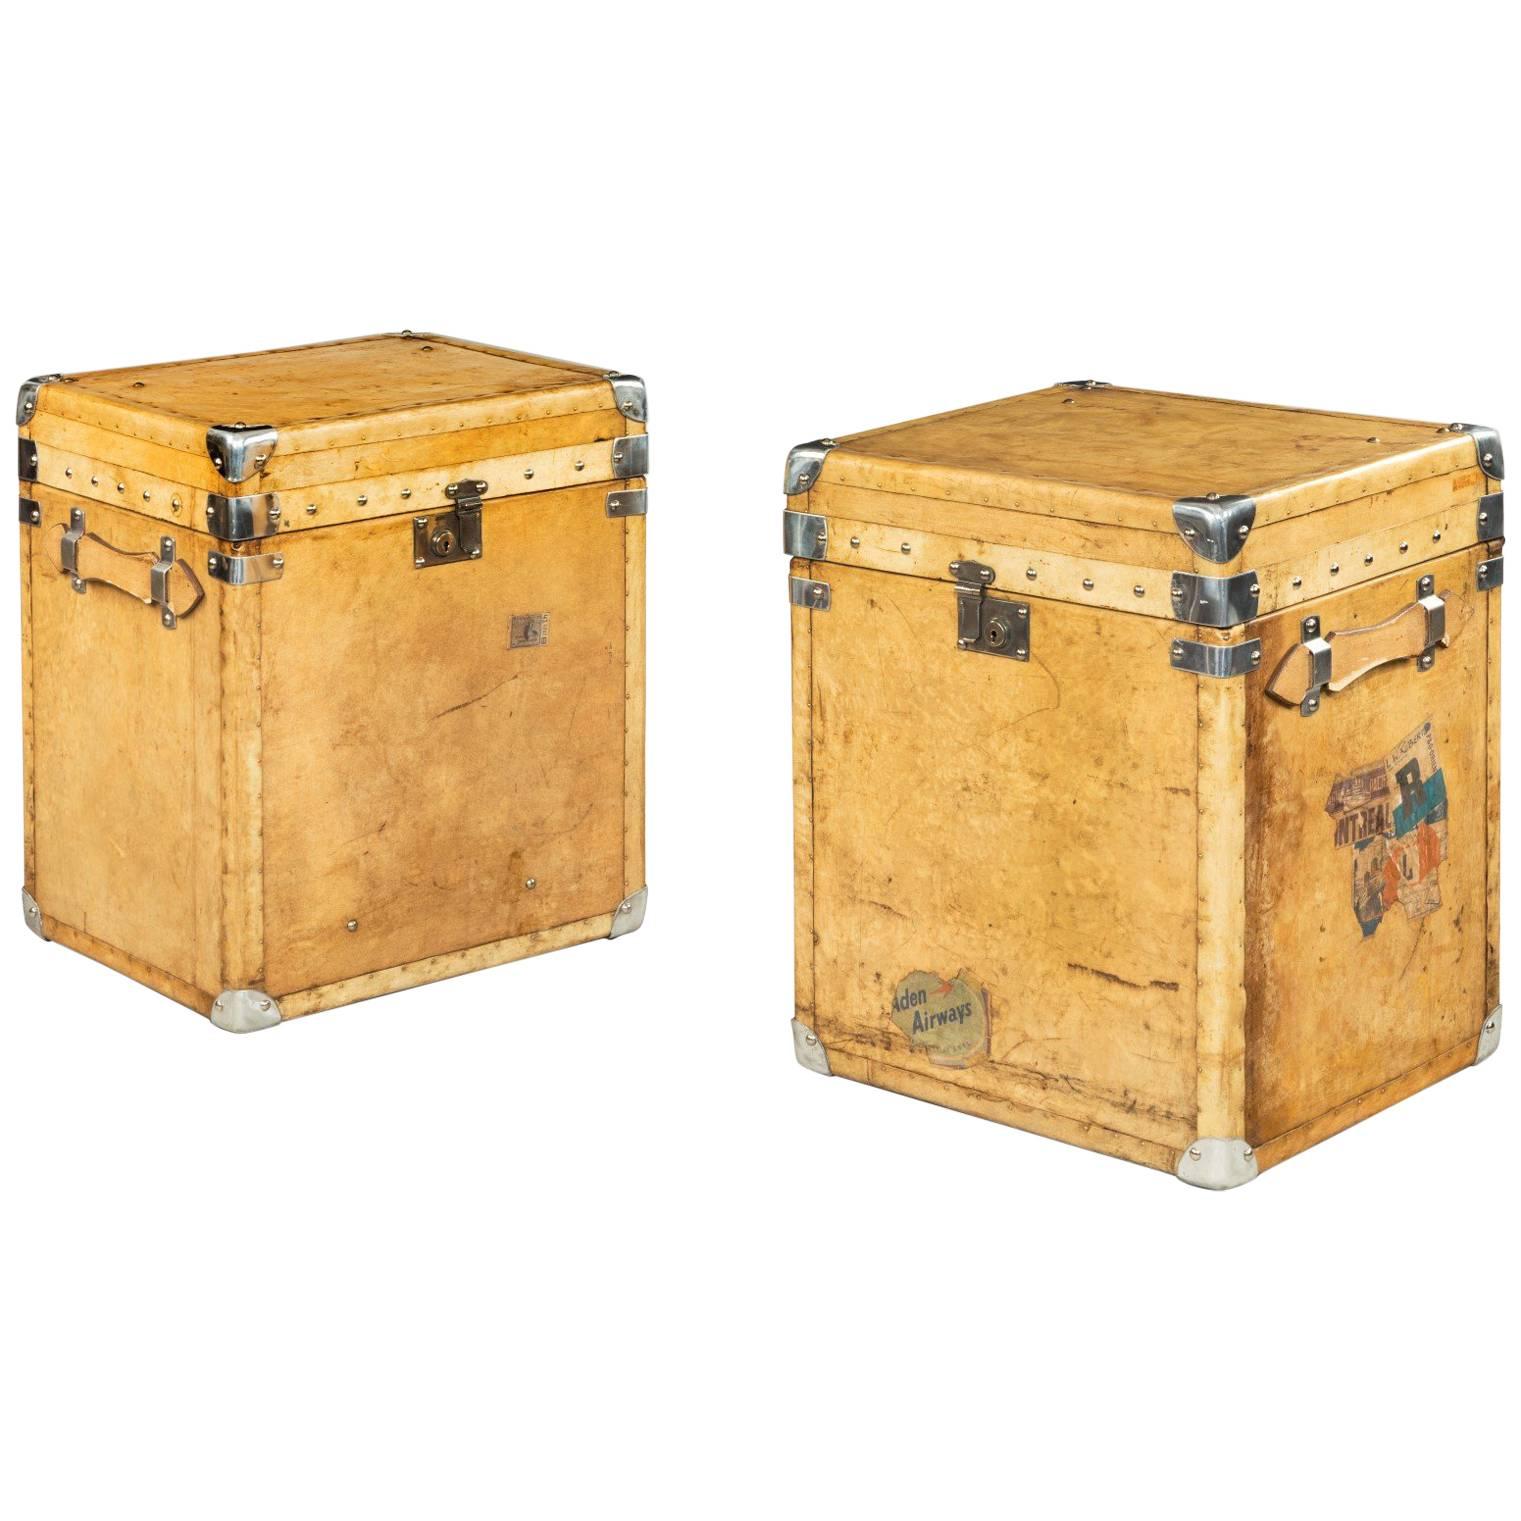 Unusual Pair of Vintage Luggage Box Trunks For Sale